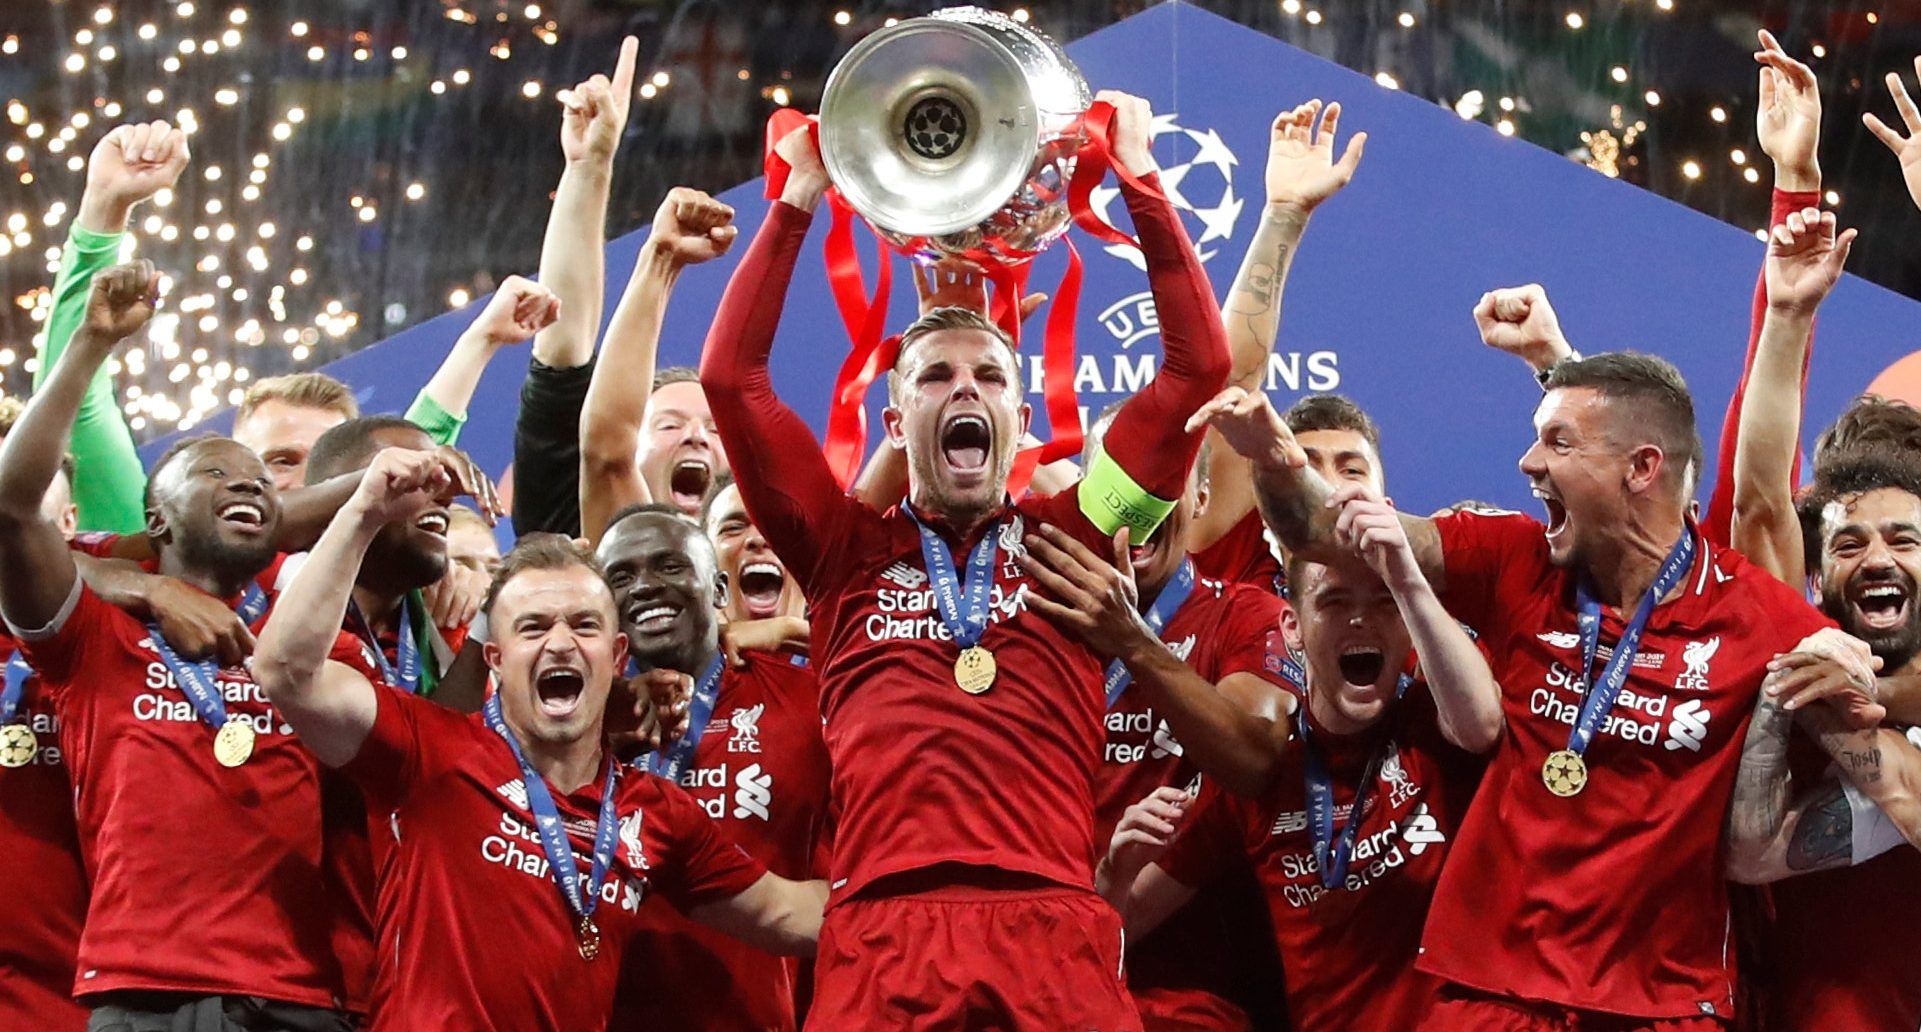 Soccer Football - Champions League Final - Tottenham Hotspur v Liverpool - Wanda Metropolitano, Madrid, Spain - June 1, 2019  Liverpool's Jordan Henderson celebrates with the trophy and teammates after winning the Champions League Final  REUTERS/Carl Recine     TPX IMAGES OF THE DAY